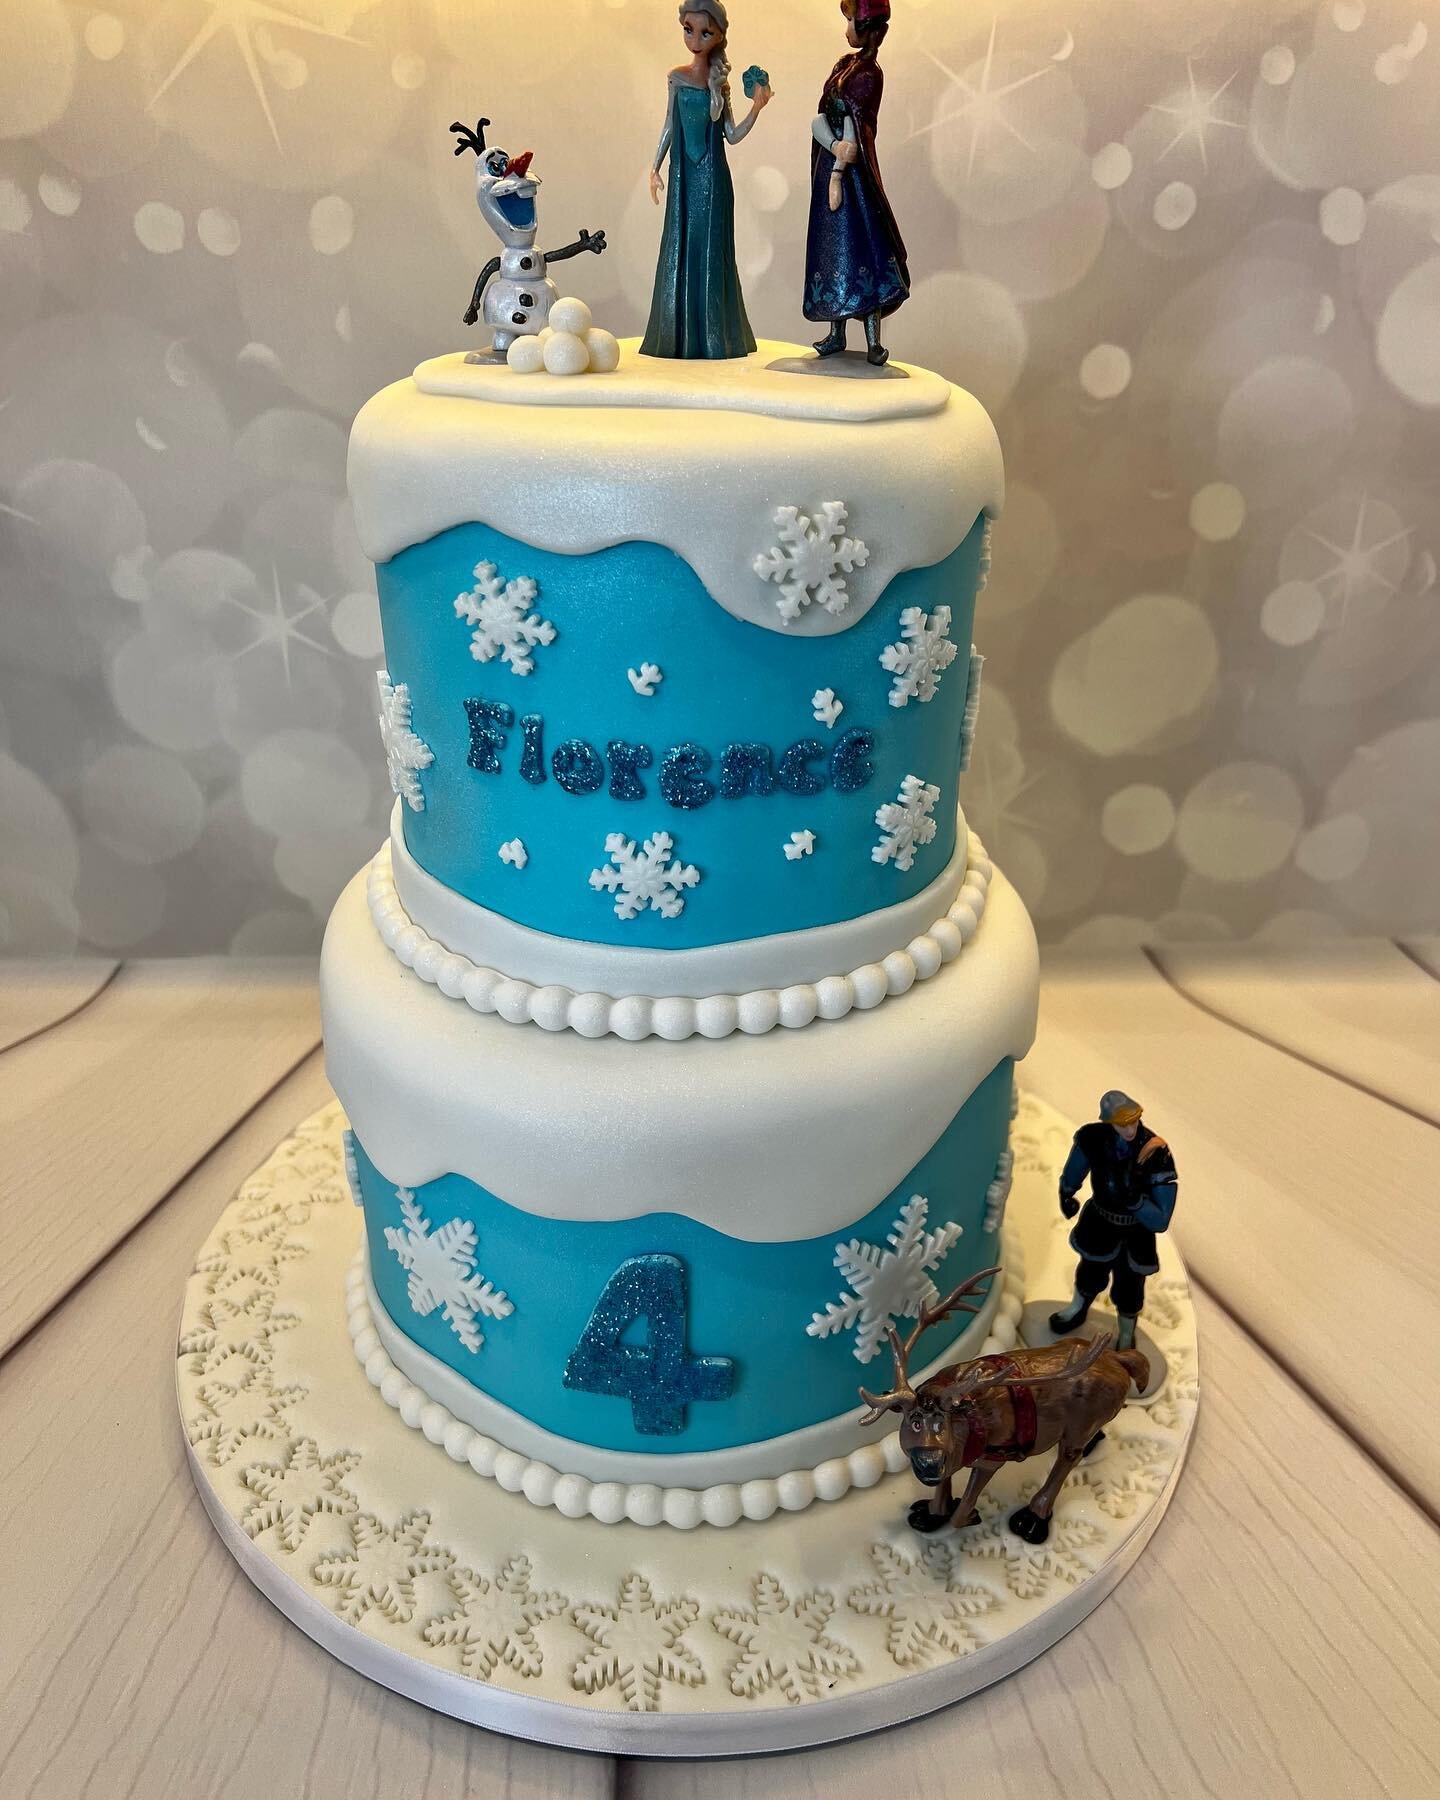 Todays post is for a special little lady who is going to be 4.  Florence loves Elsa and Frozen and is having an Elsa themed party.  Hope you have a lovely day Florence. Xx